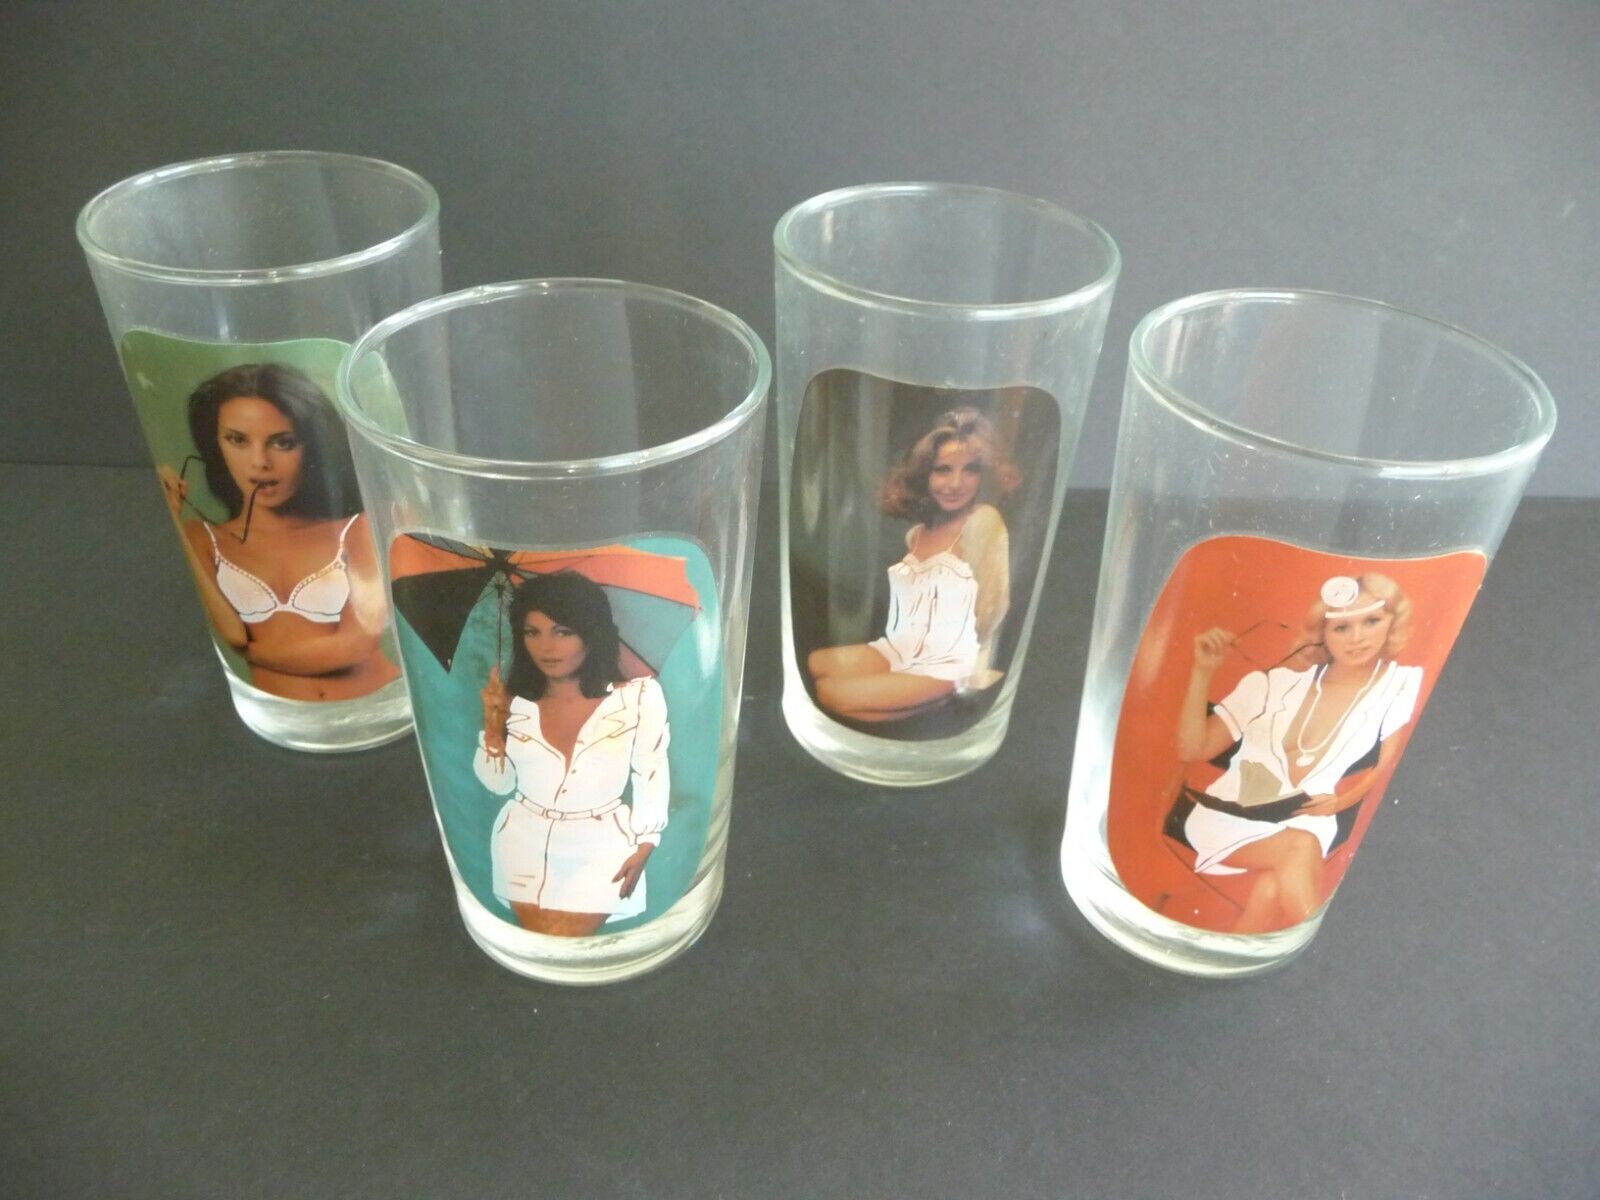 Sip and Strip Nudy Girl Vintage 70s Bar Drink Glasses by Libbey